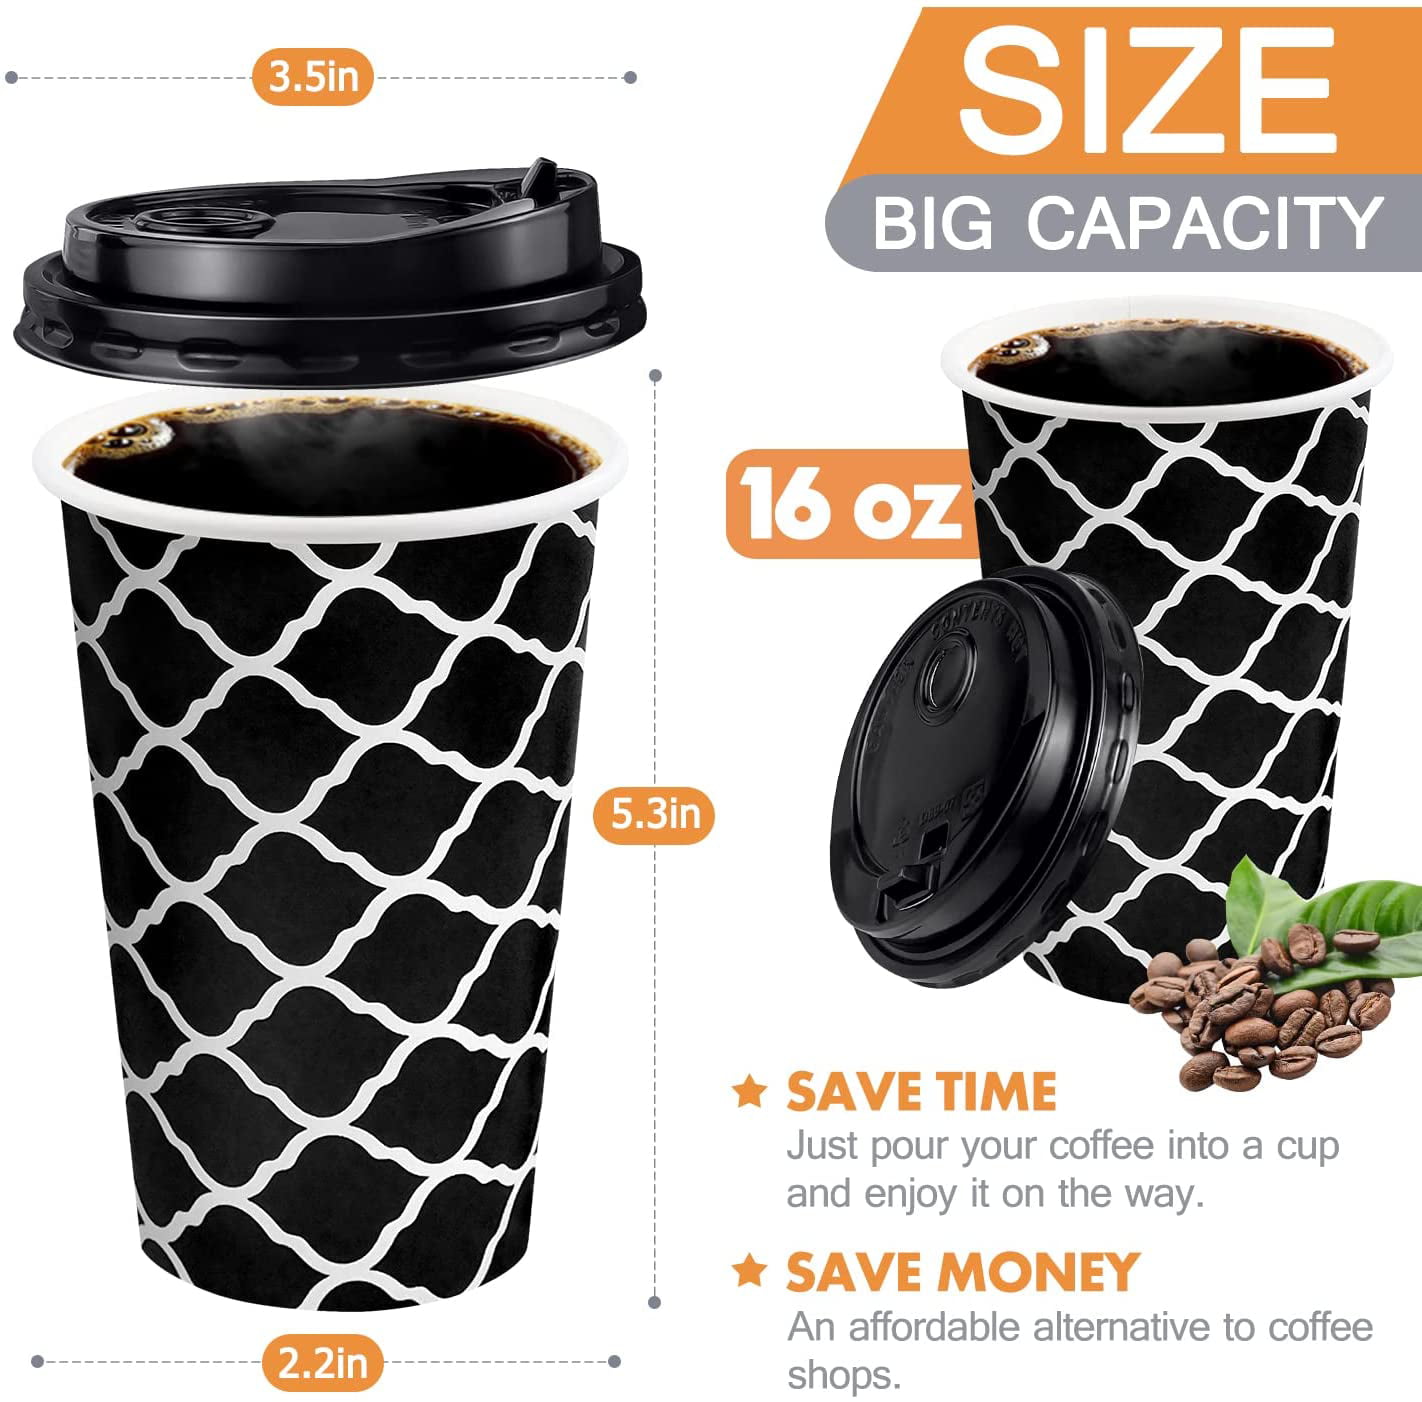  72 Set 16 oz Dog Puppy Theme Design Disposable Coffee Cups with  Lids, Hot Paper Coffee Cup with Lids, for Coffee Tea Hot Chocolate Drinks,  Restaurant, Kiosks, Shops, Cafes : Health